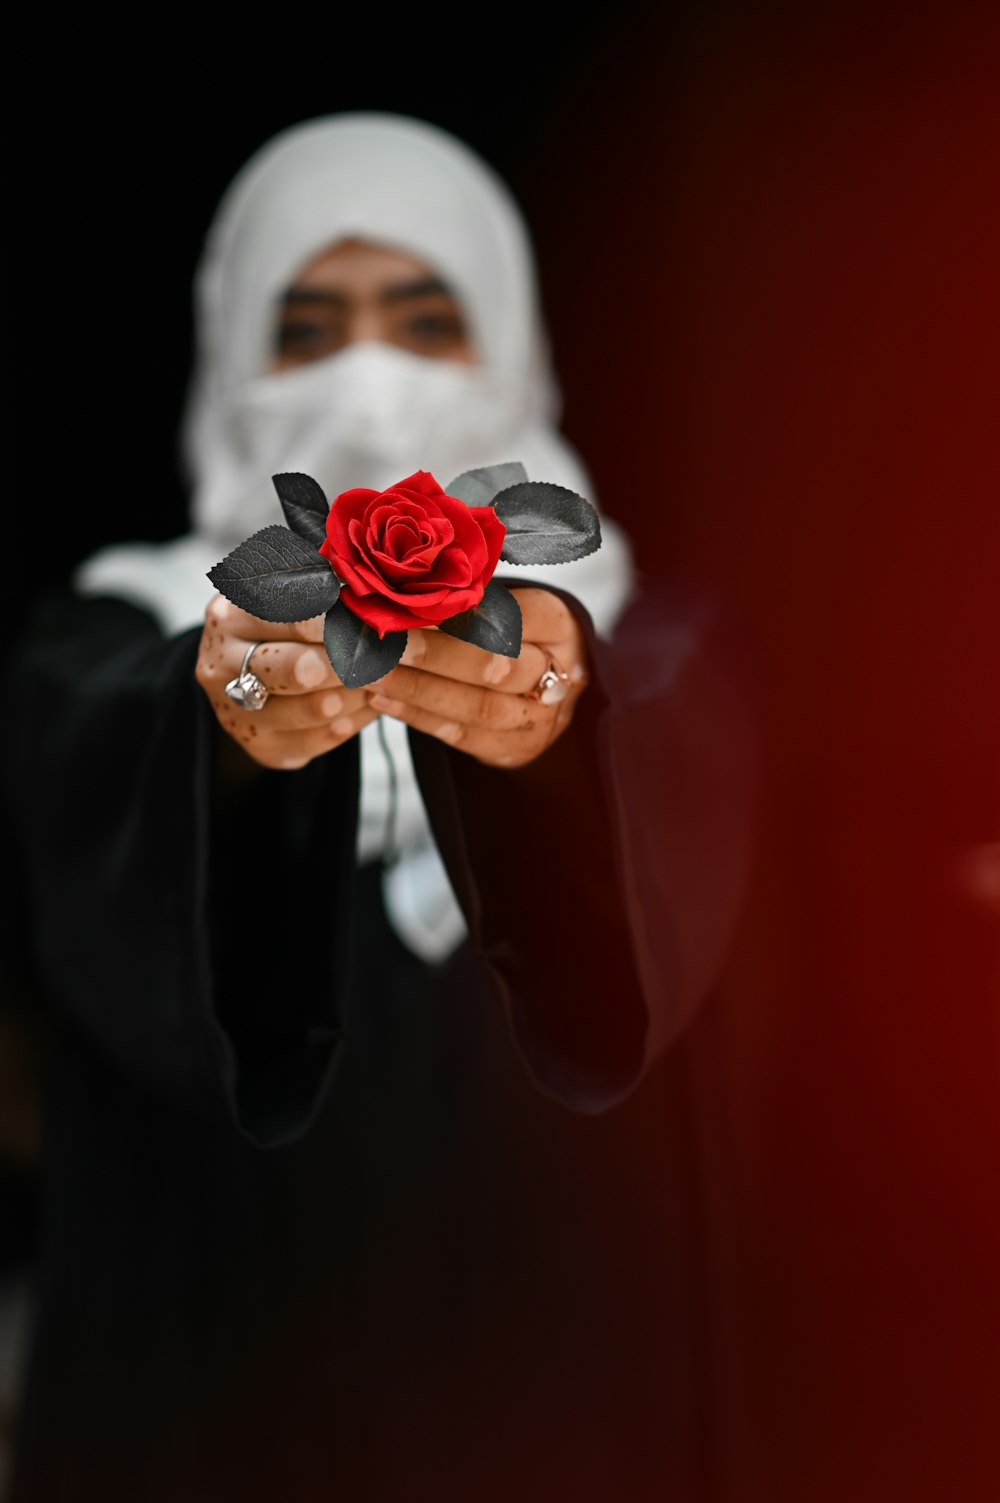 person holding red rose in front of woman in black hijab